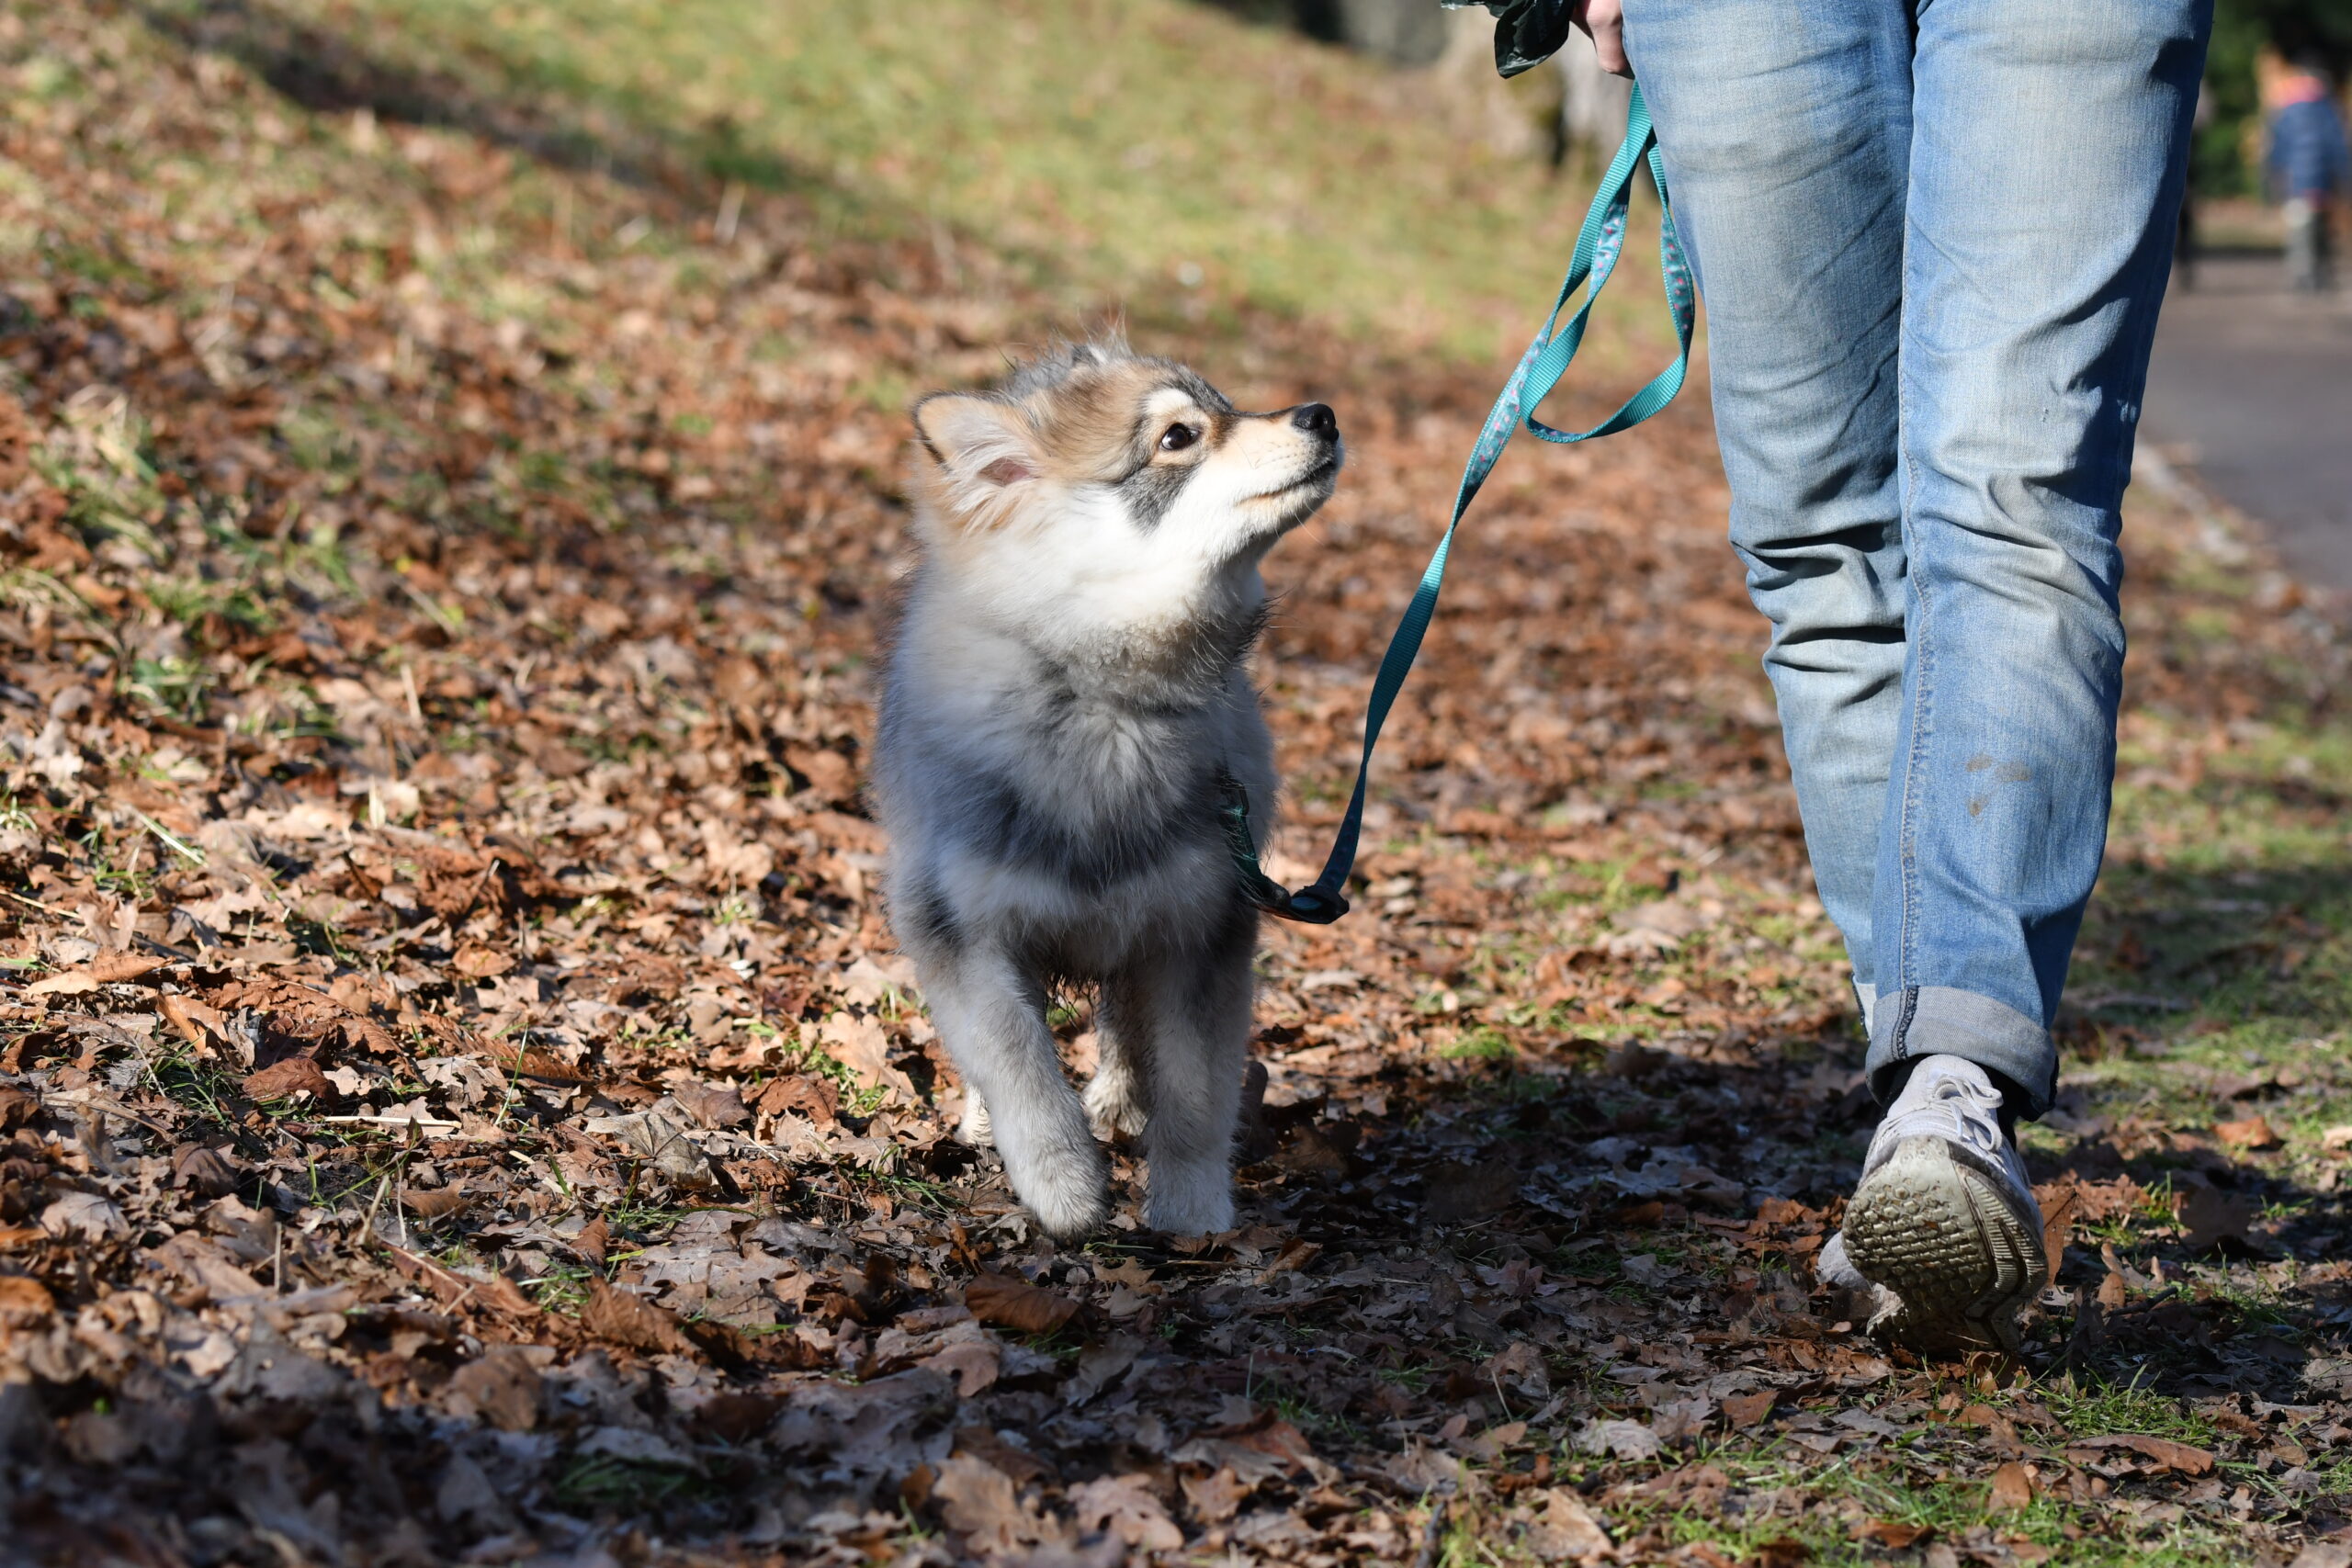 Walking on a leash: Puppies will learn how to walk on a leash without pulling or tugging.